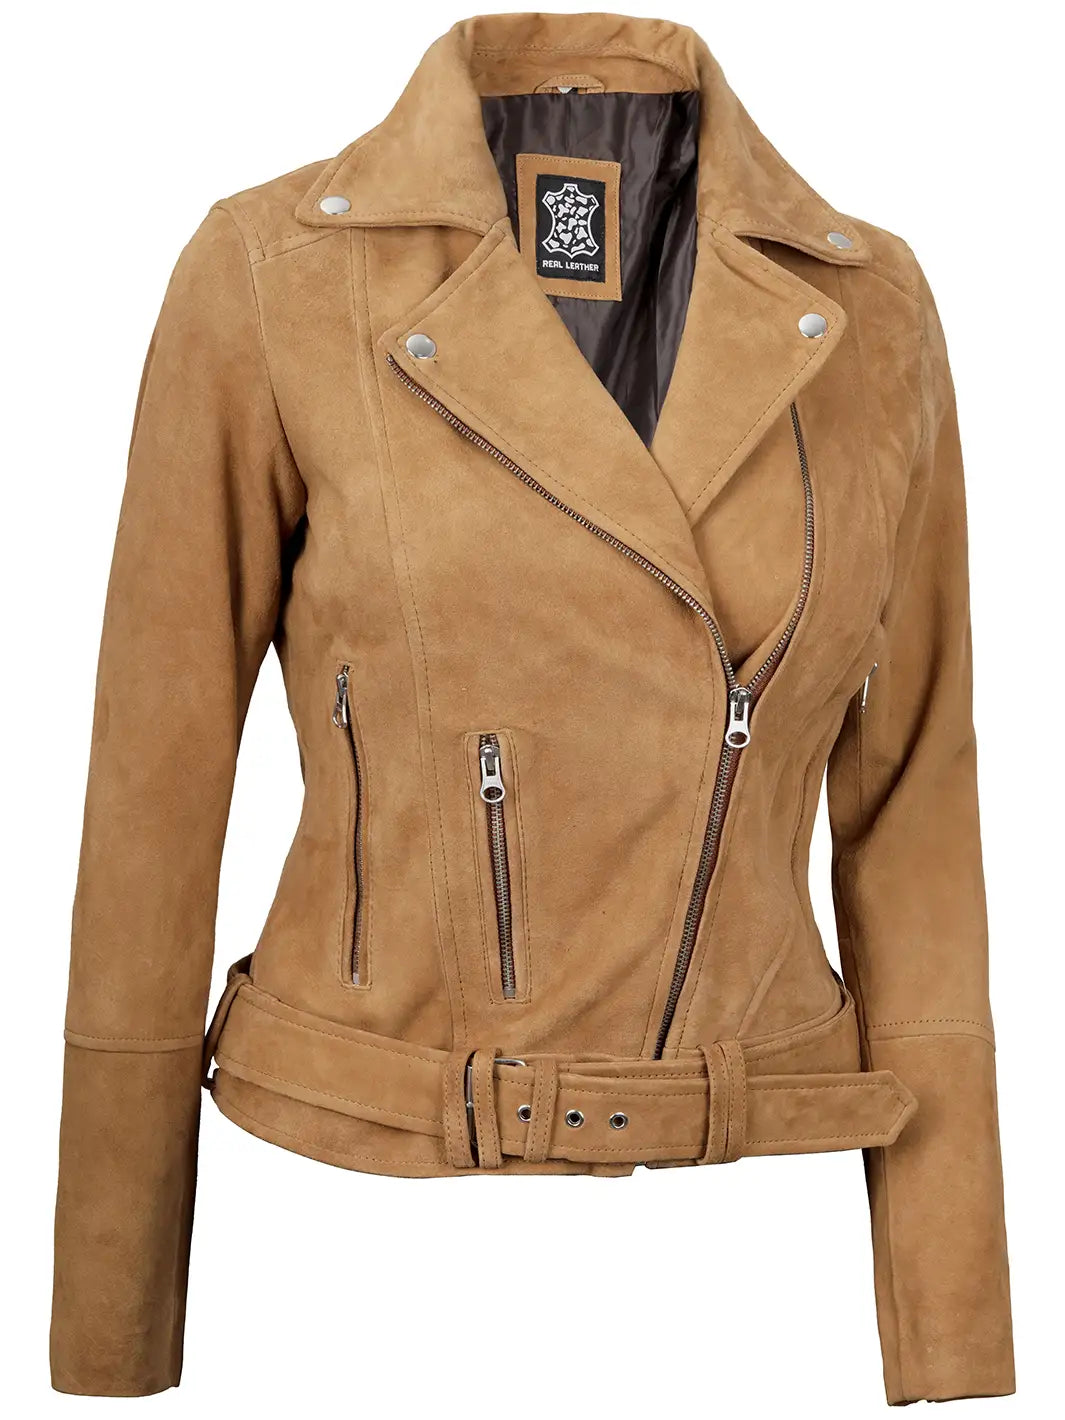 Womens light brown suede leather jacket